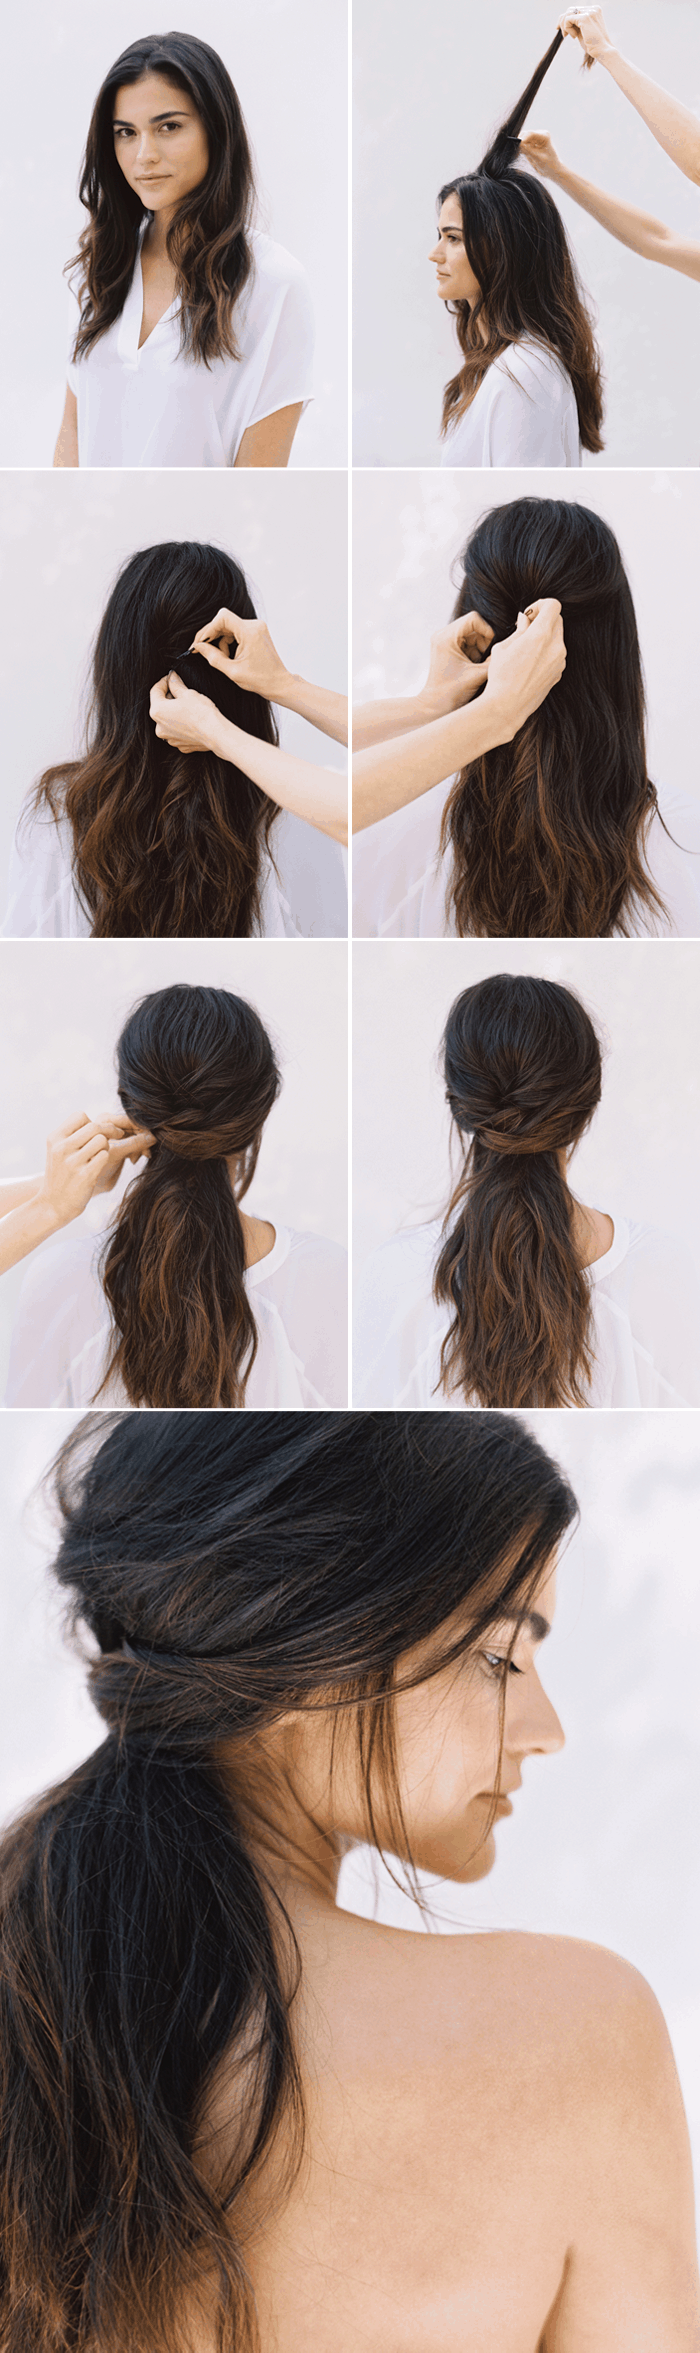 easy-hairstyles-for-long-straight-hair-to-do-at-home-98 Easy hairstyles for long straight hair to do at home